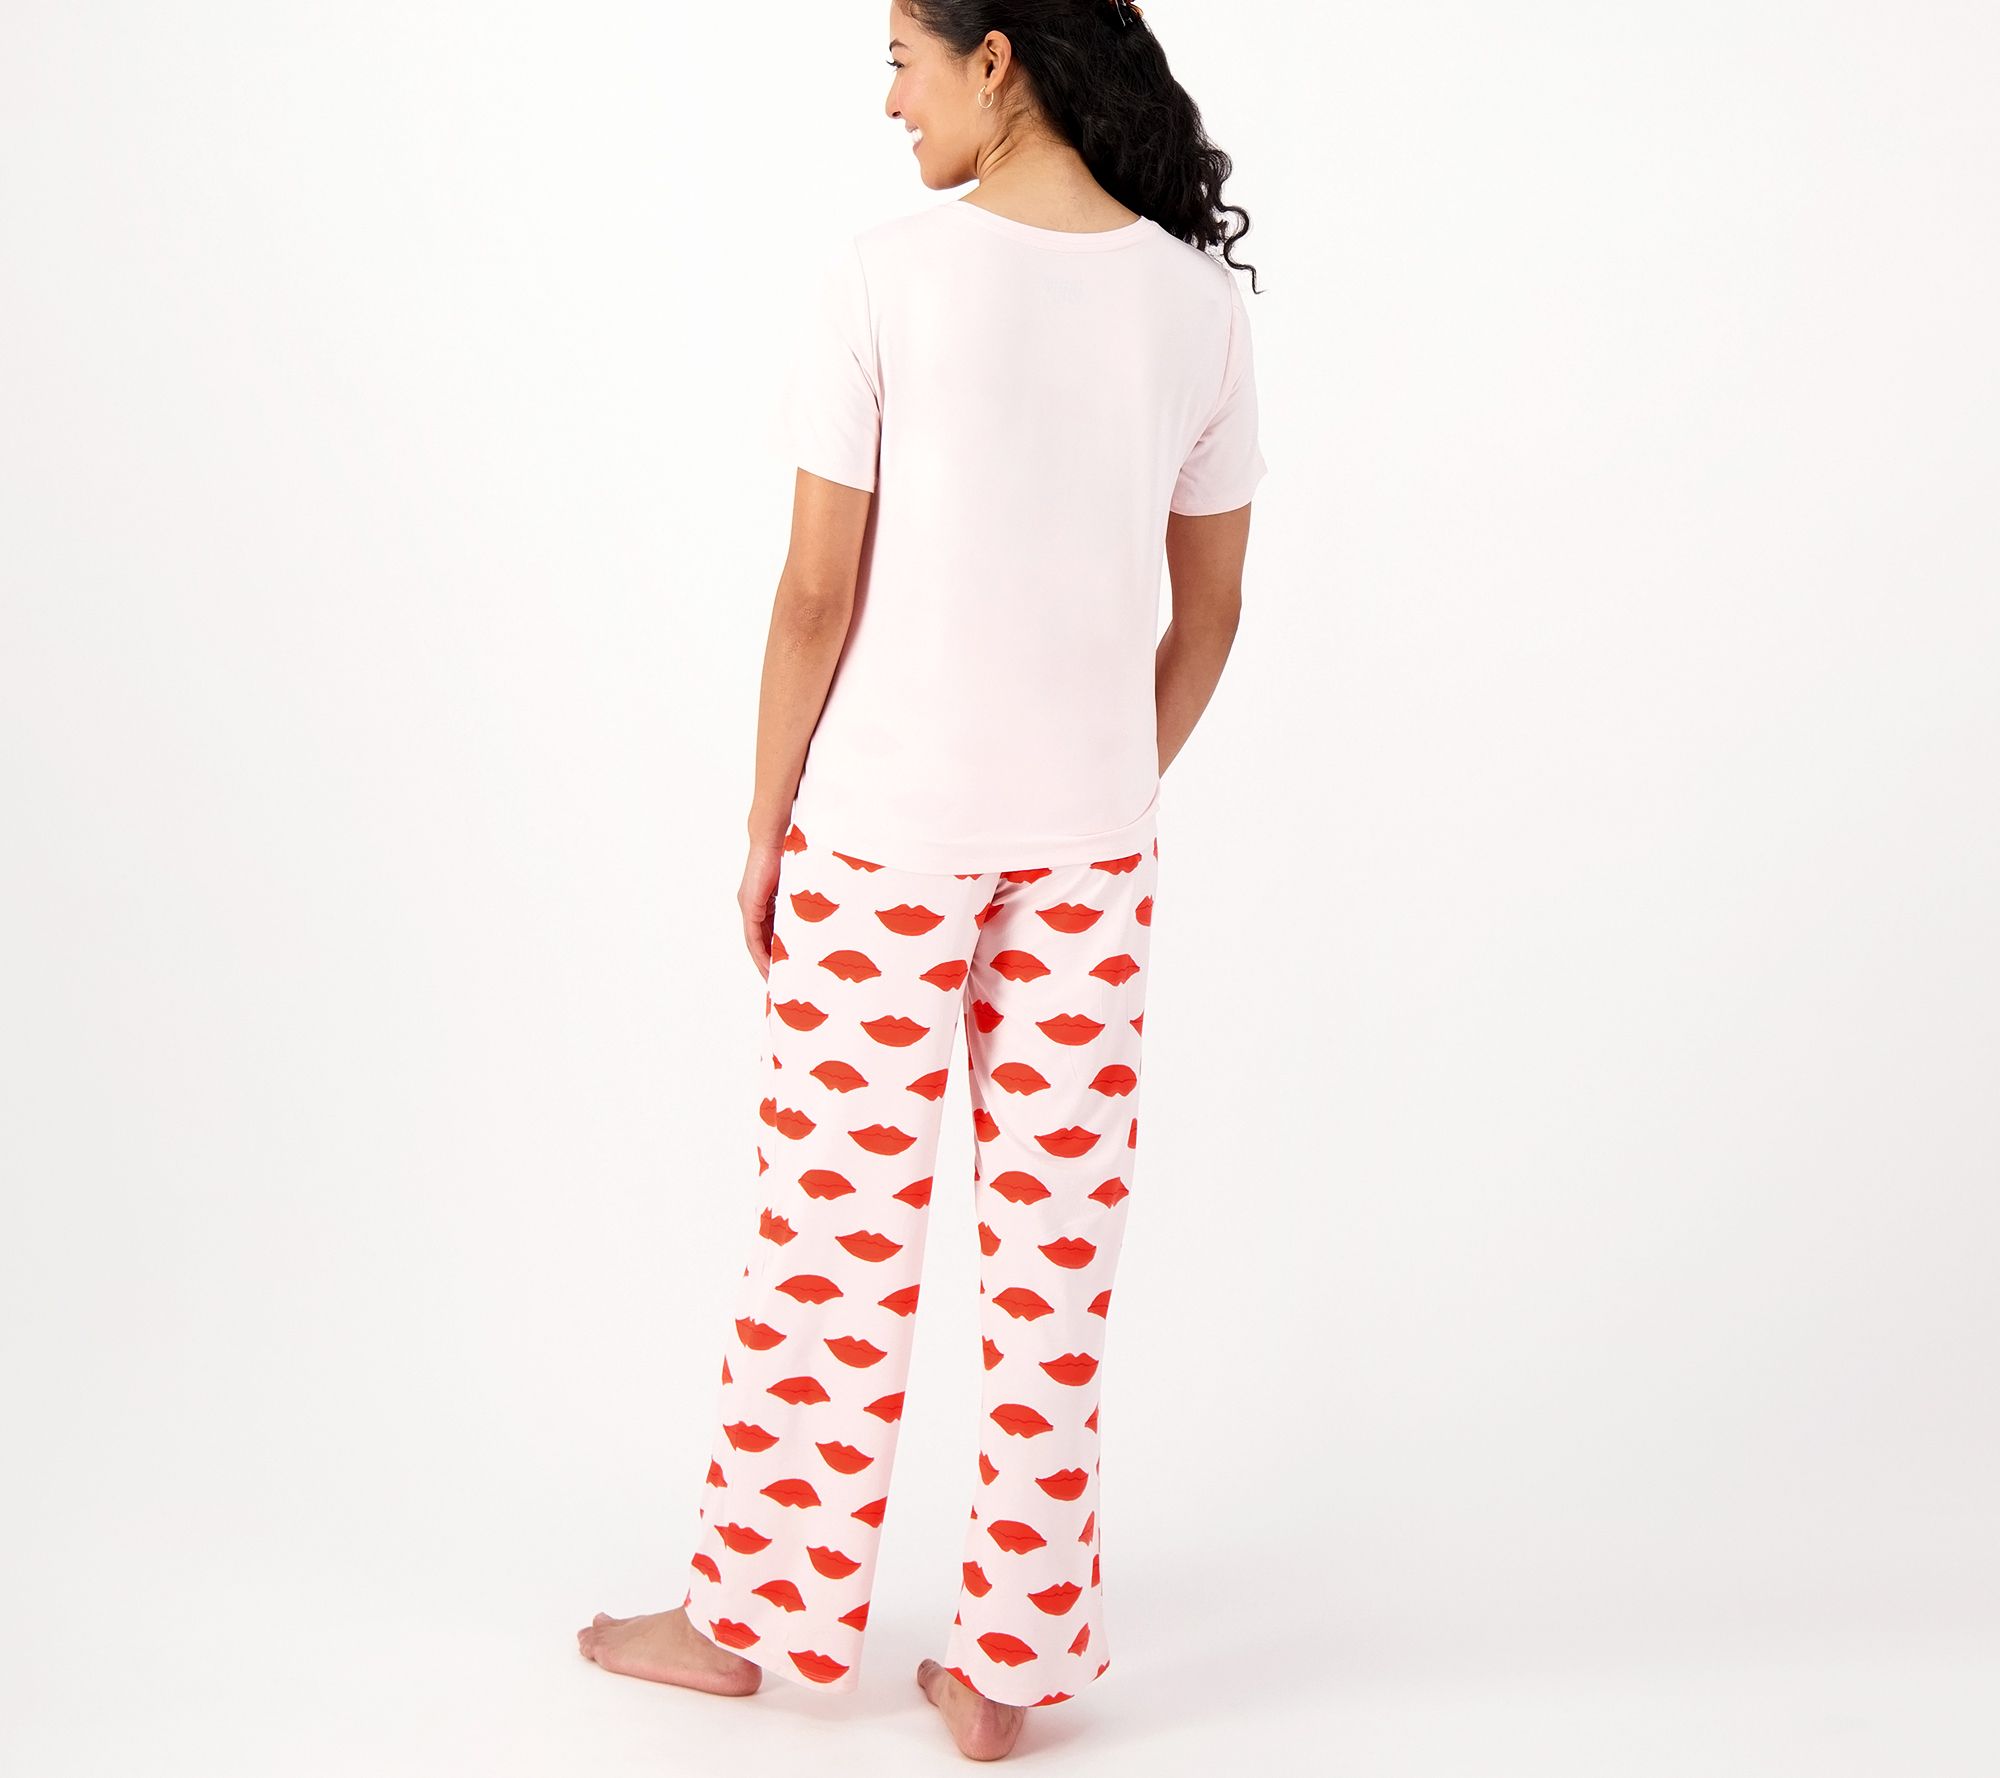 Oh Canada Women's Jersey Pajama Pants Little Blue House CA, 40% OFF